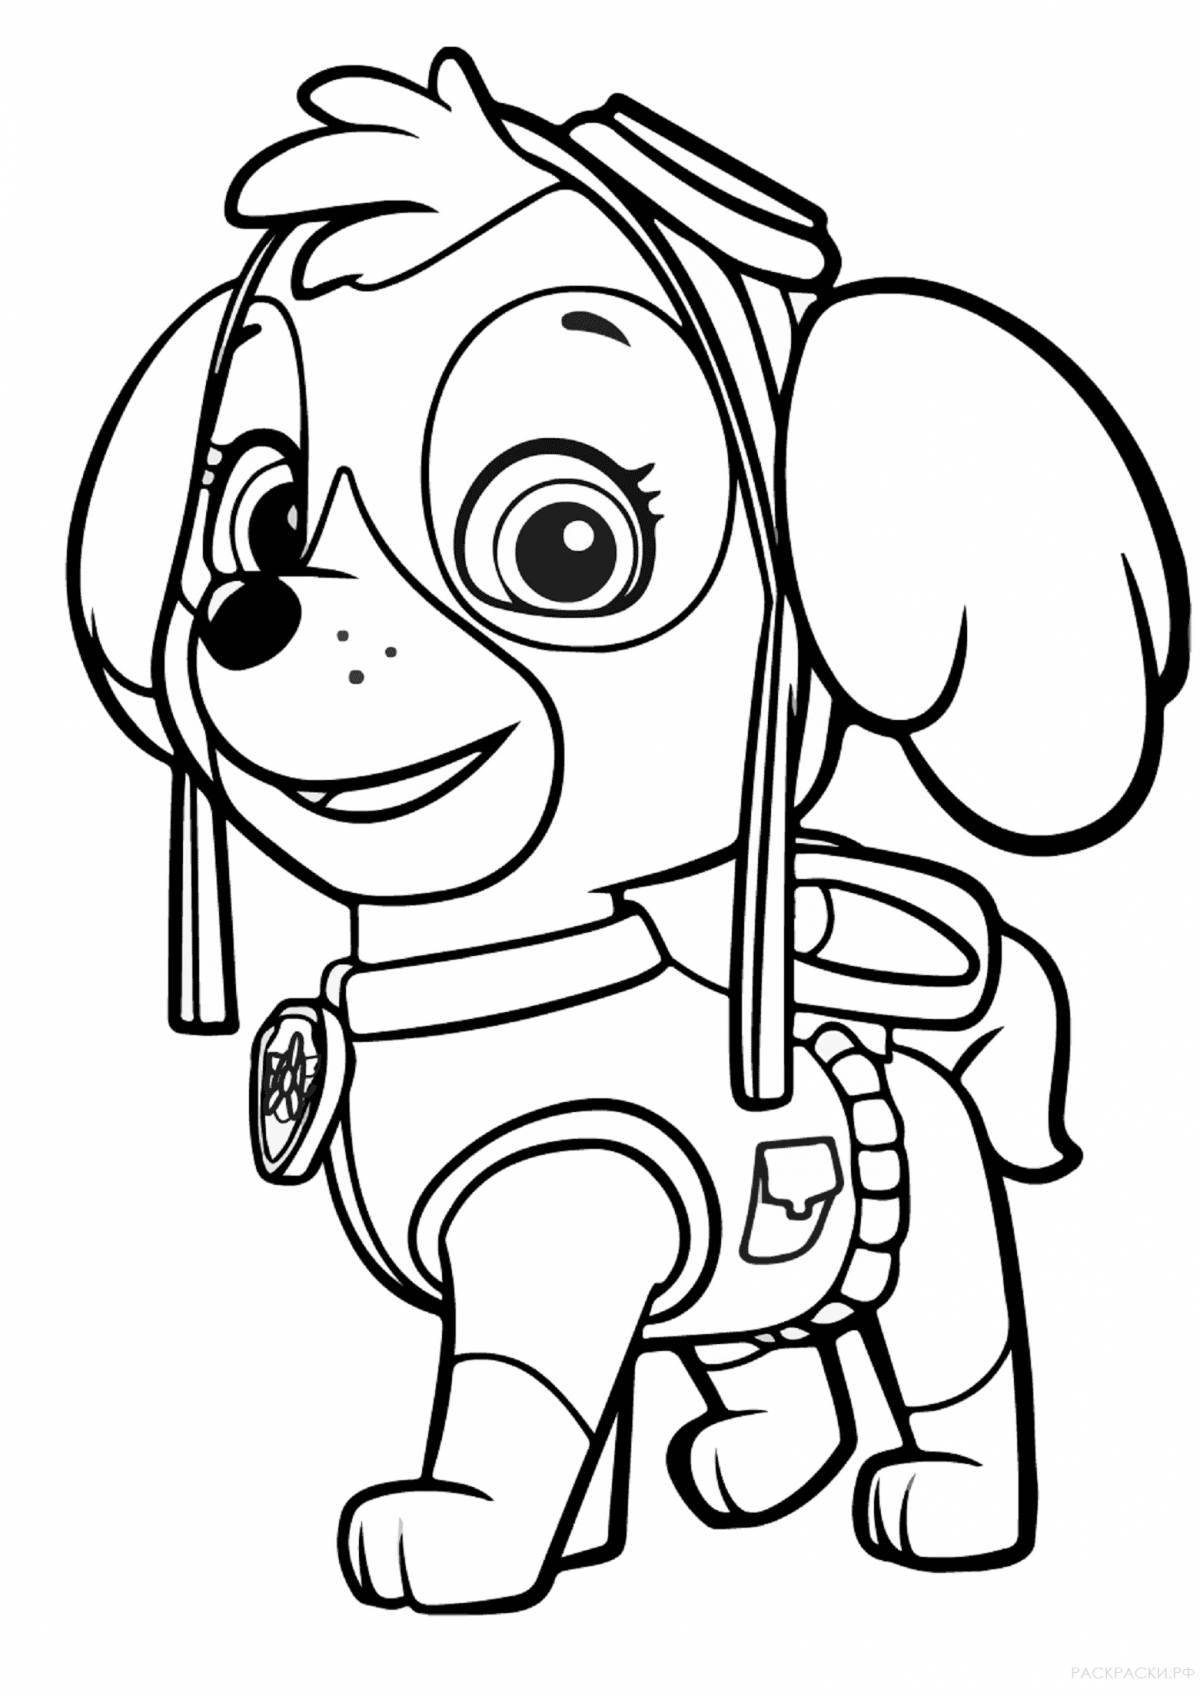 Paw Patrol bright coloring book for kids 3 4